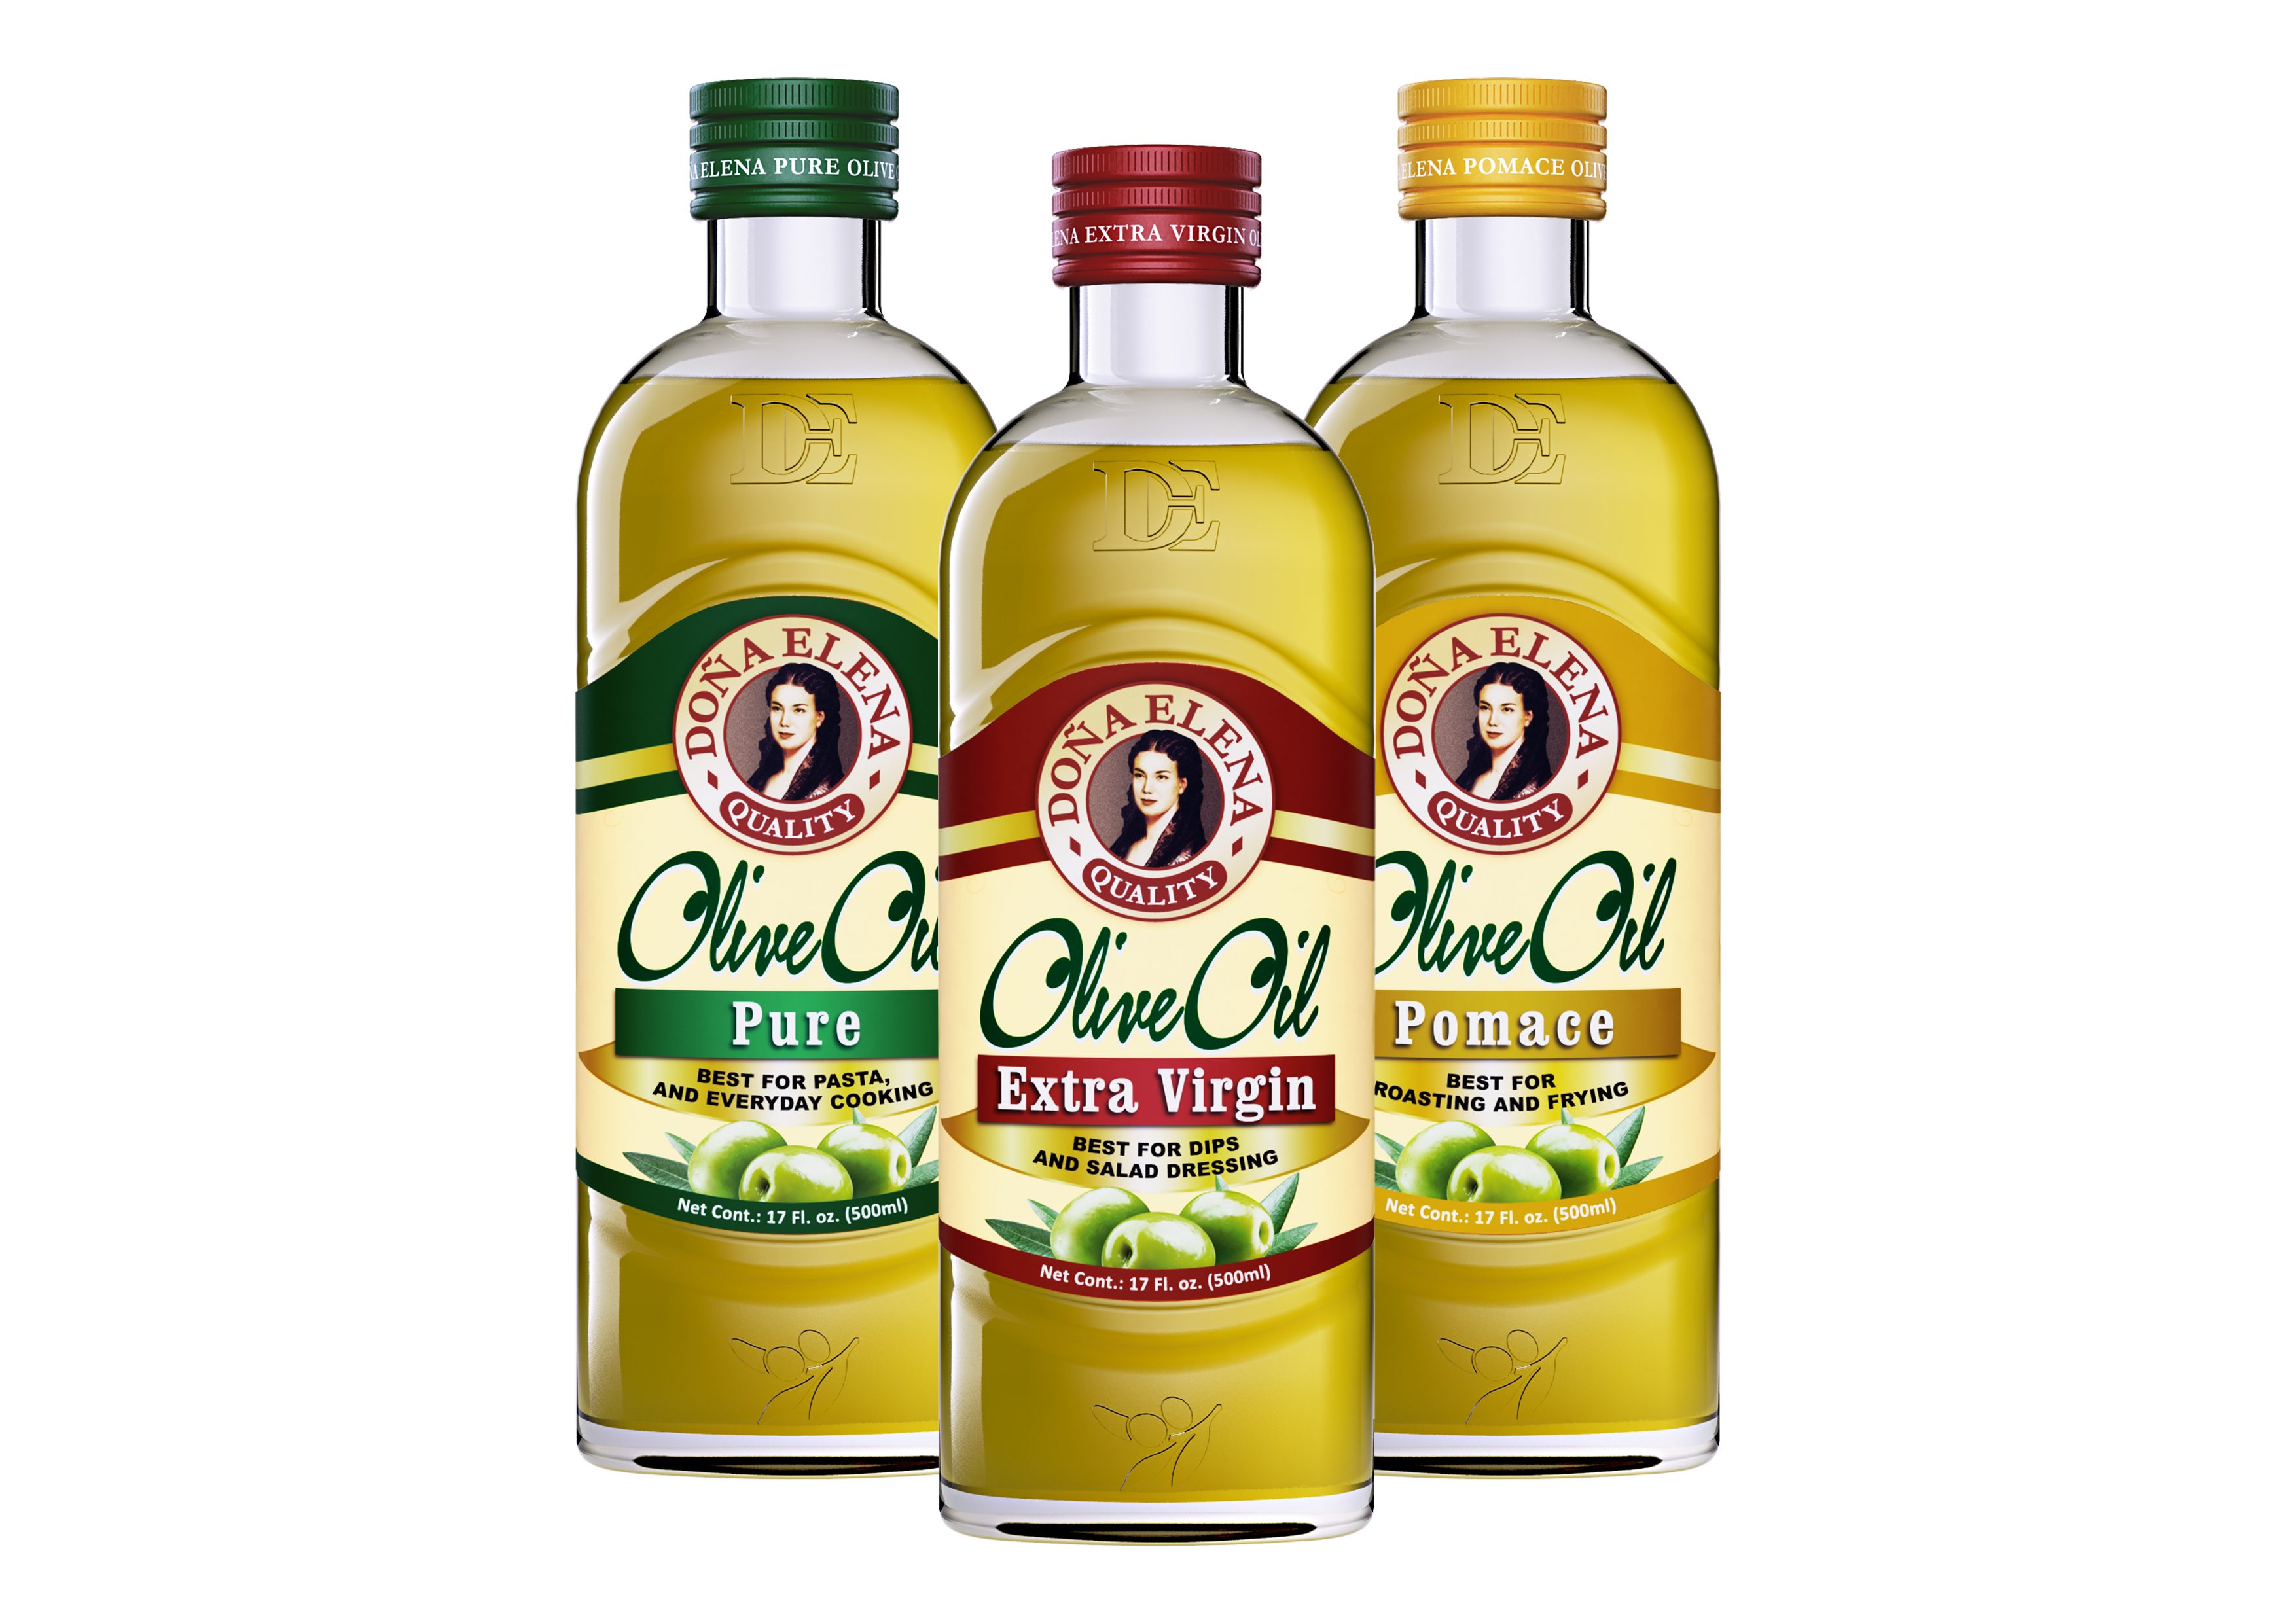 DOÑA ELENA OLIVE OIL. The popular olive oil brand now comes in redesigned engraved bottles. 